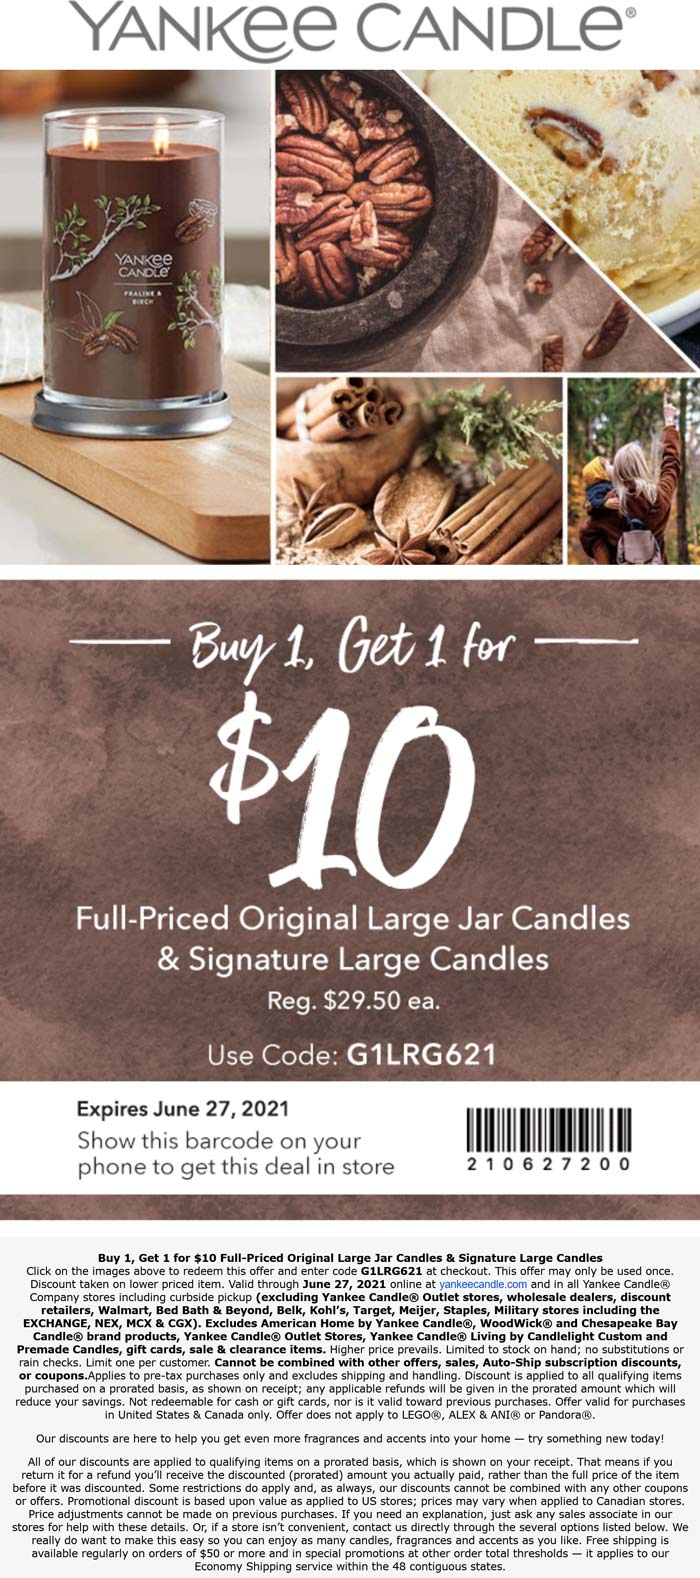 Yankee Candle stores Coupon  Second large candle $10 at Yankee Candle, or online via promo code G1LRG621 #yankeecandle 